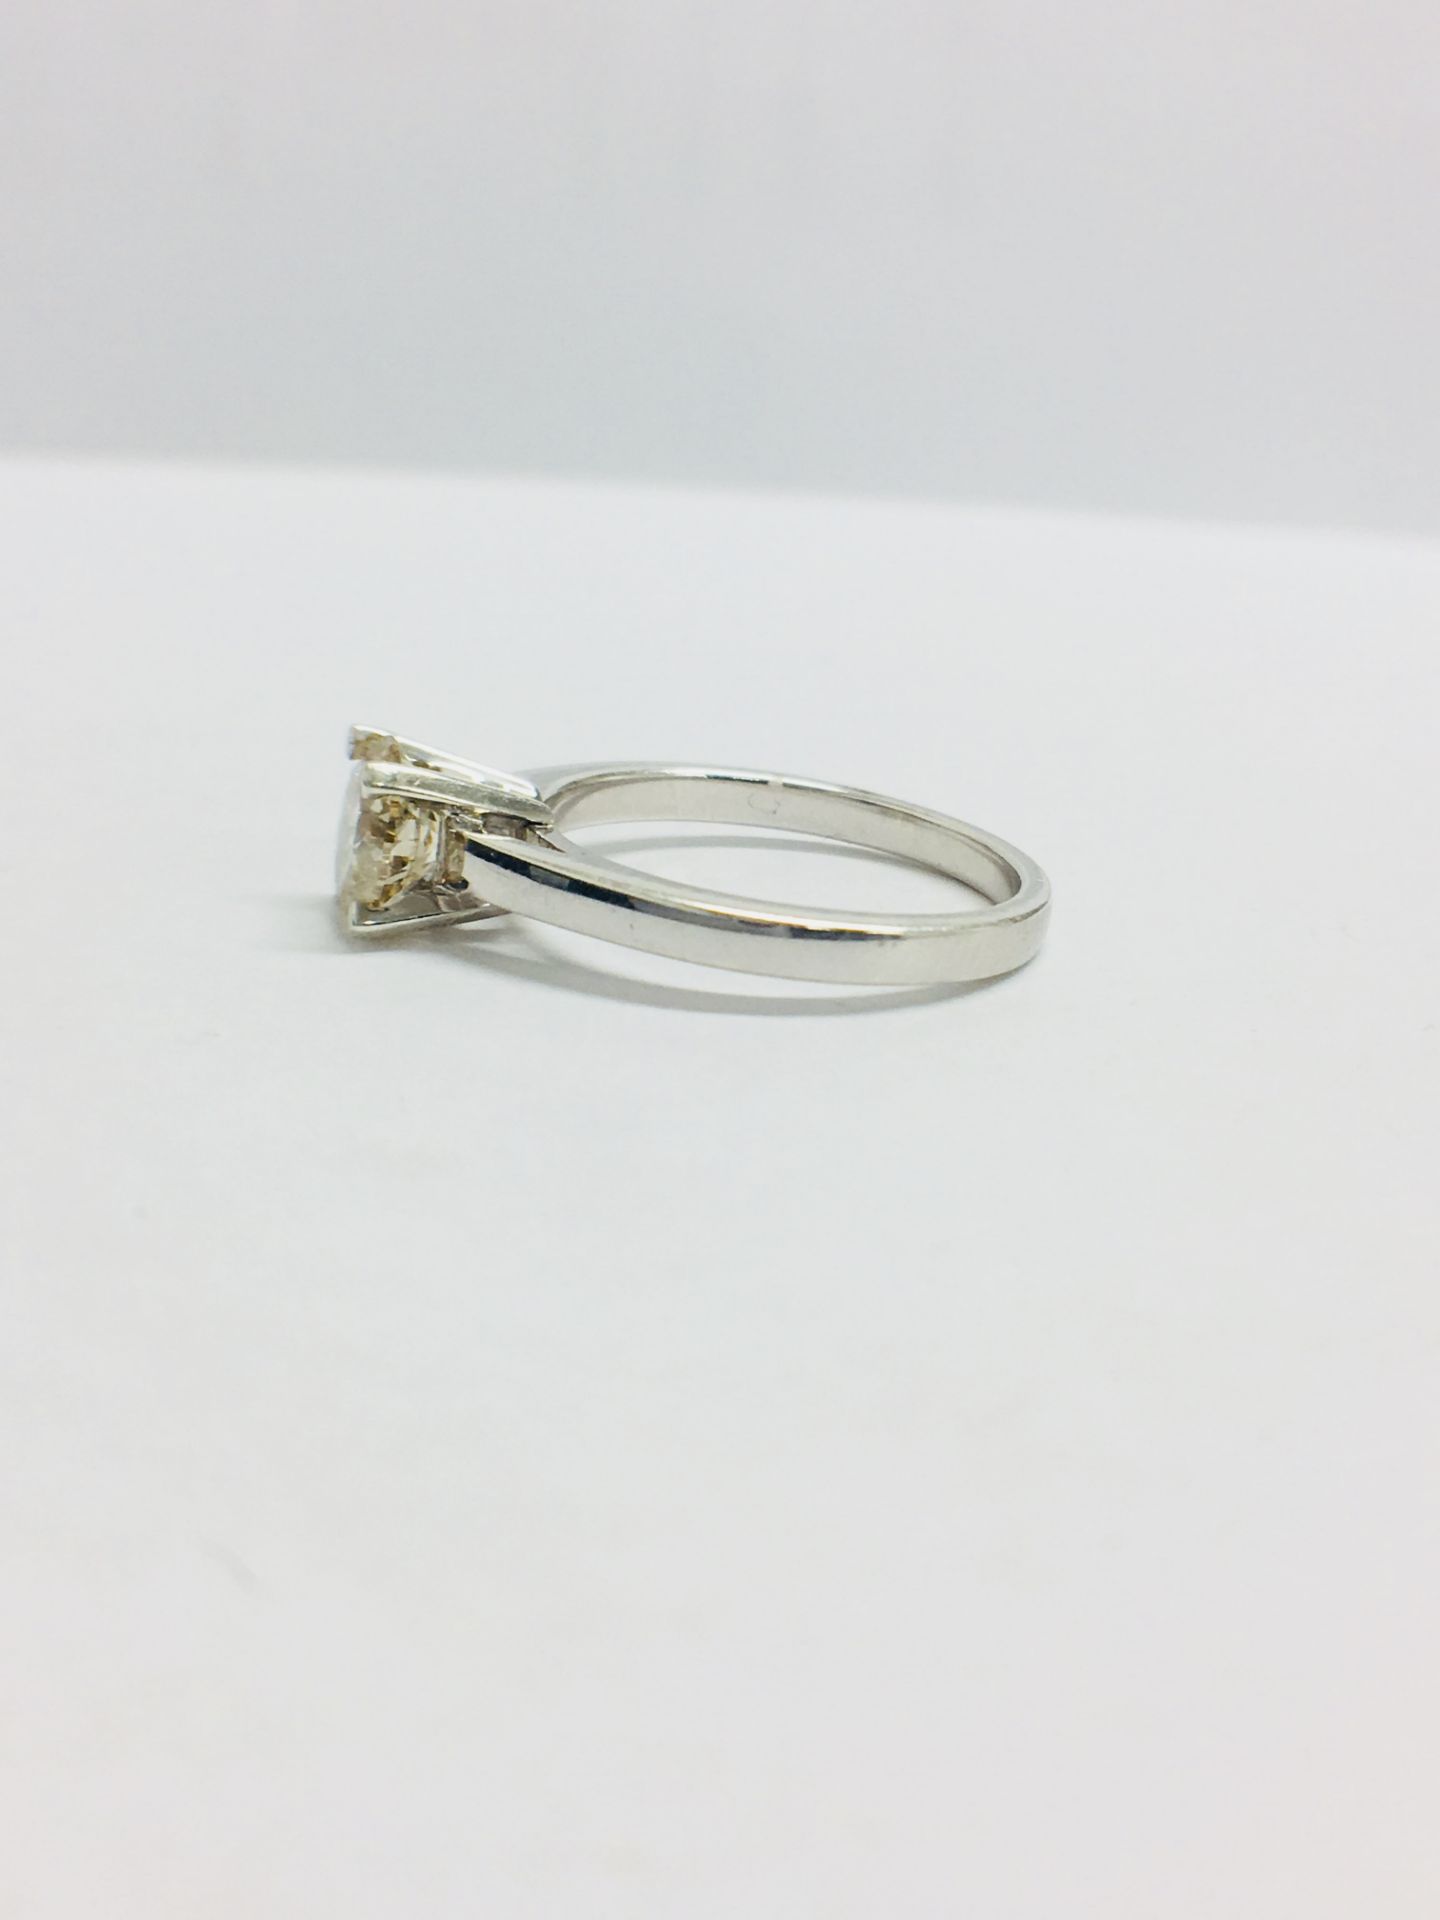 1.02Ct Diamond Solitaire Ring Set In 18Ct Gold. - Image 3 of 8